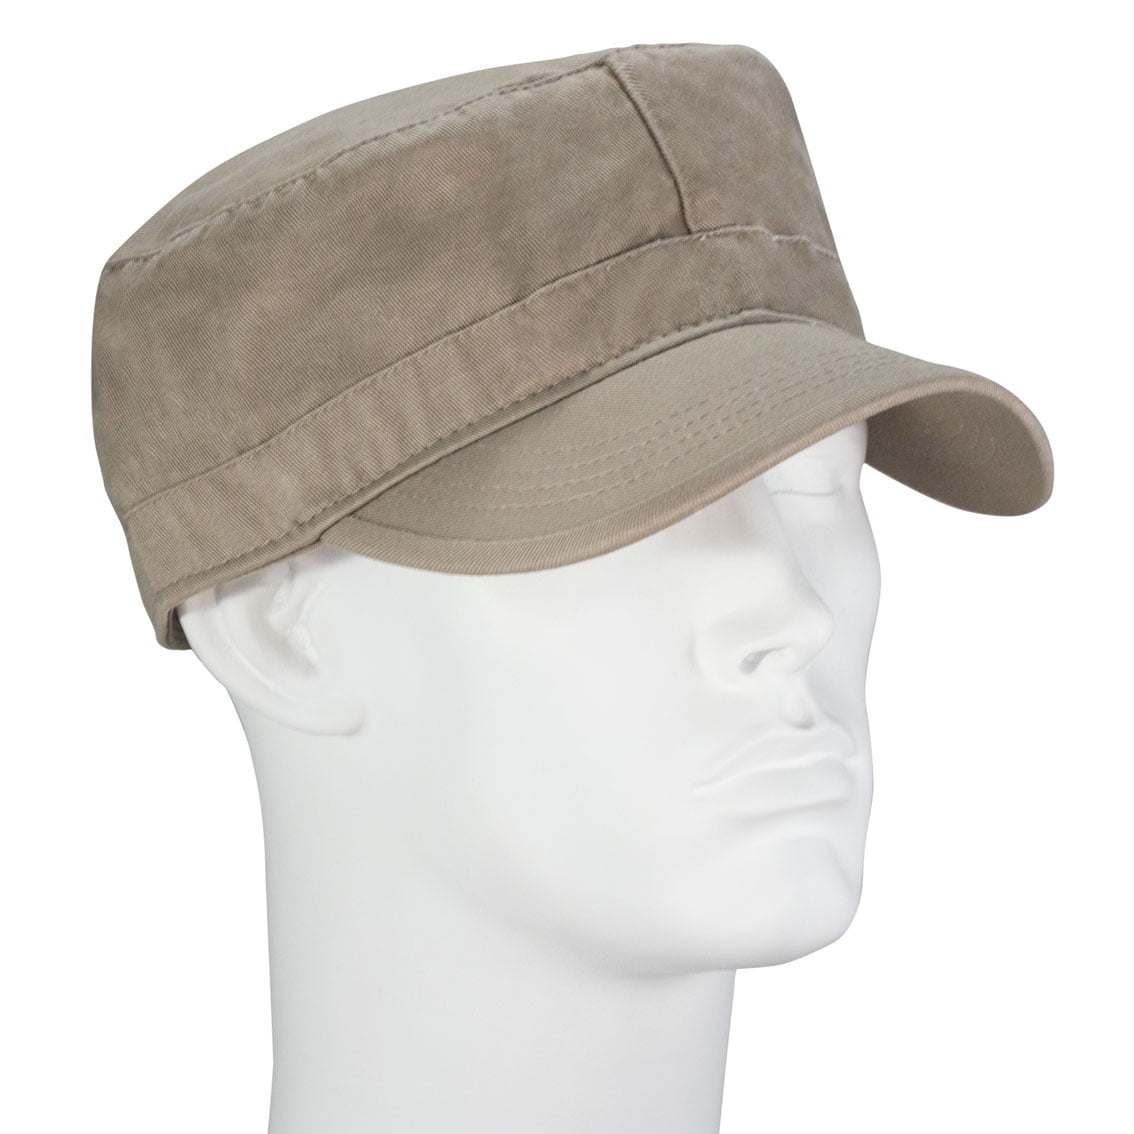 1pc Khaki Plain Castro Military Fatigue Army Hat - Fitted - Unconstructed - 100% Cotton